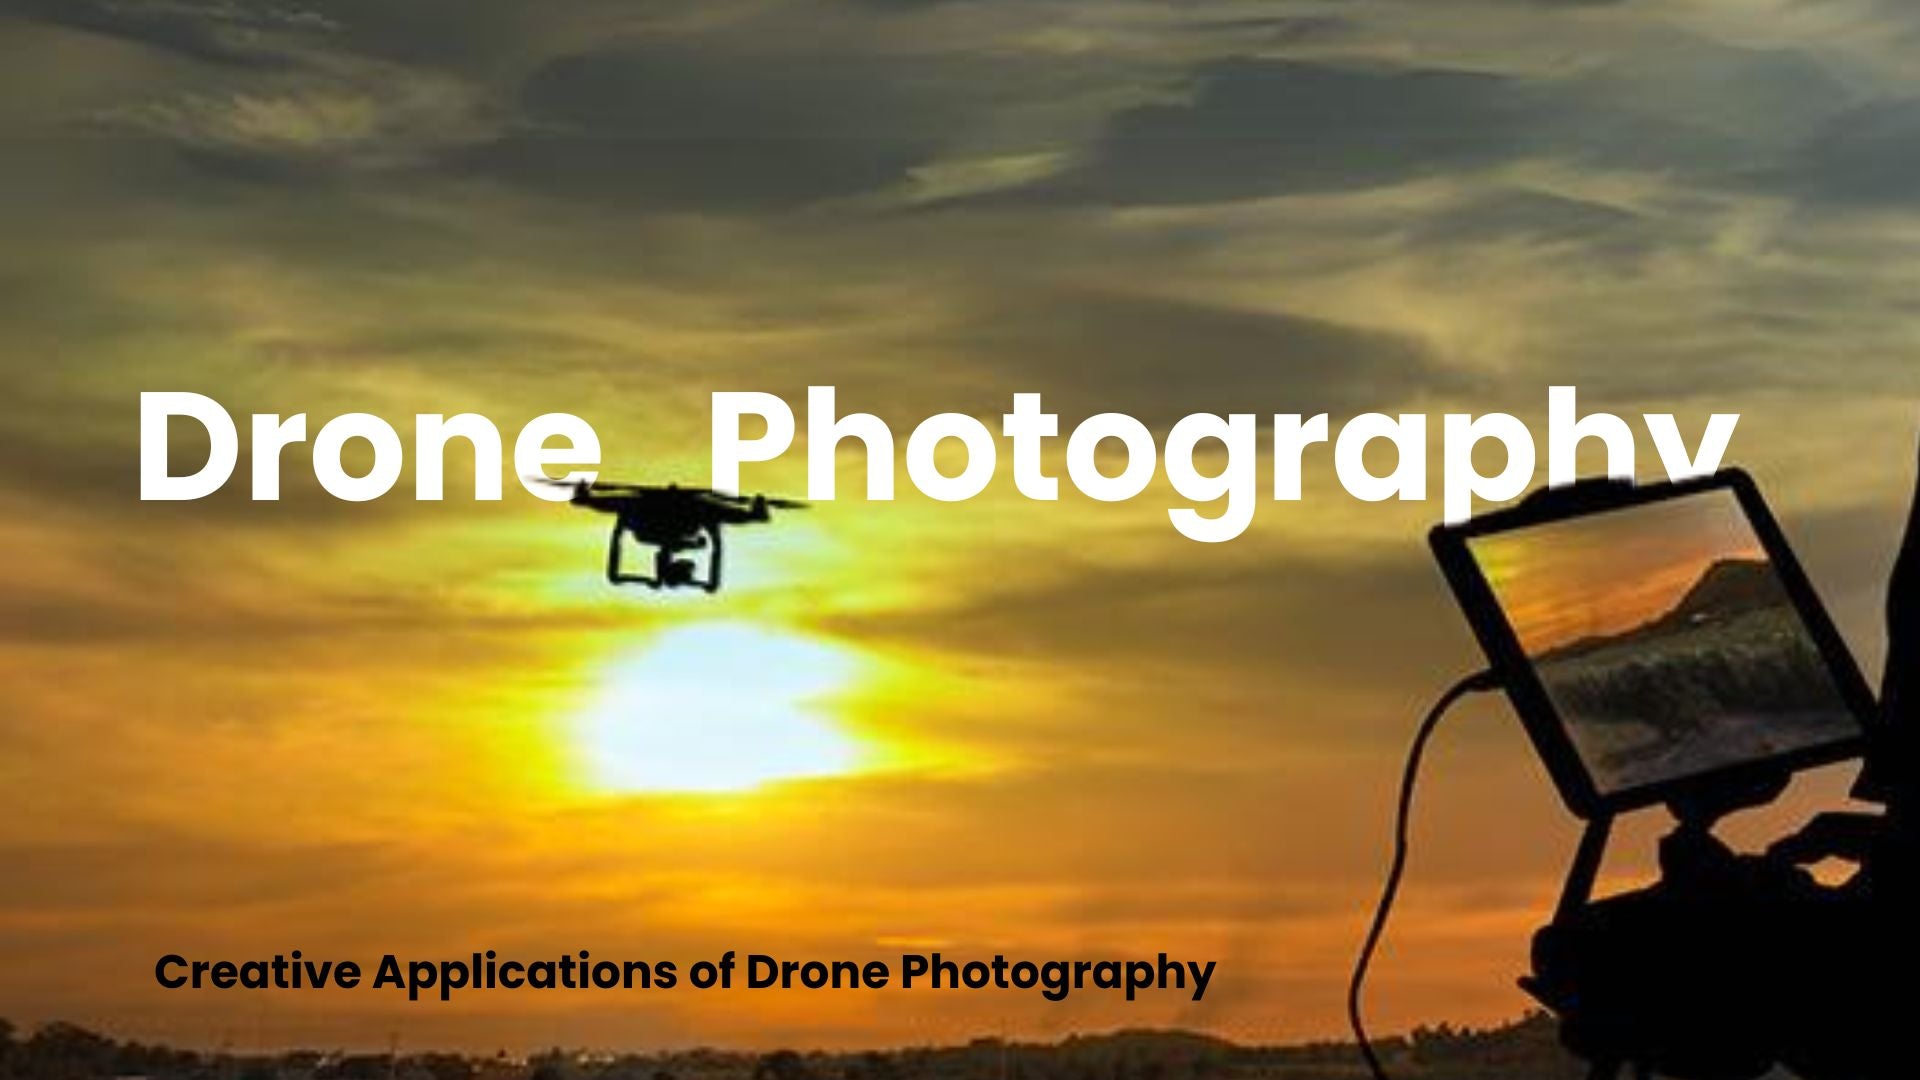 The Sky as a Canvas: Creative Applications of Drone Photography